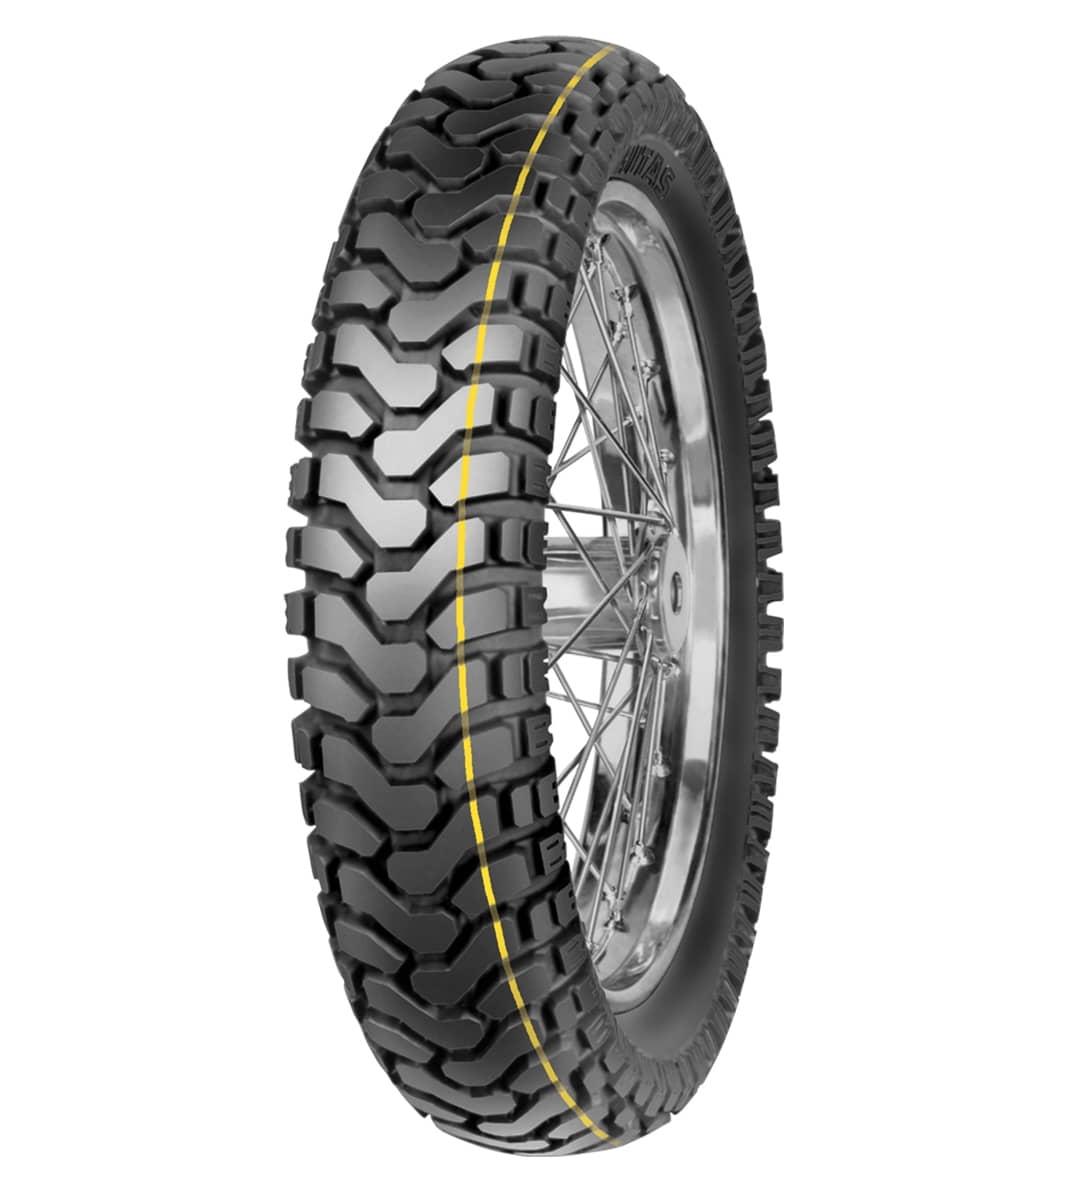 Mitas E-07 ENDURO 140/80-18 Trail OFF Trail DAKAR 70T Yellow Tubeless Rear Tire, 224429, 140/80-18, Adventure Touring, E Series, E-07 Enduro, Rear, Trail, Trail OFF, Tires - Imported and distributed in North &amp; South America by Lindeco Genuine Powersports - Premier Powersports Equipment and Accessories for Motorcycle Enthusiasts, Professional Riders and Dealers.